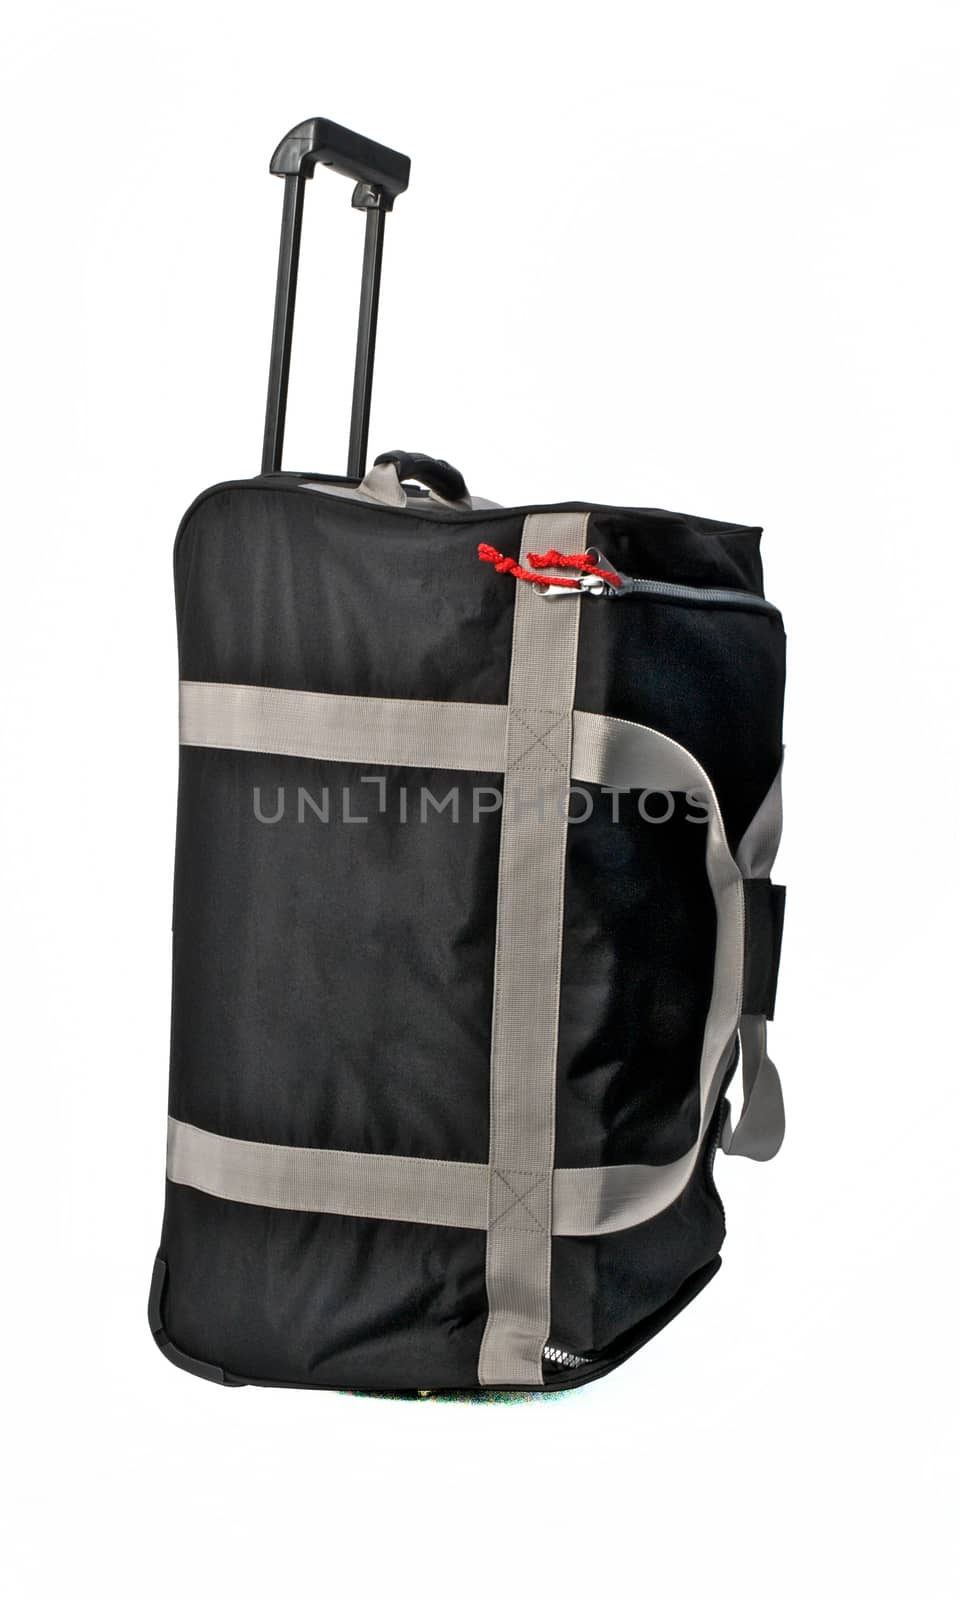 Travel Bag Gray Color Large on White background